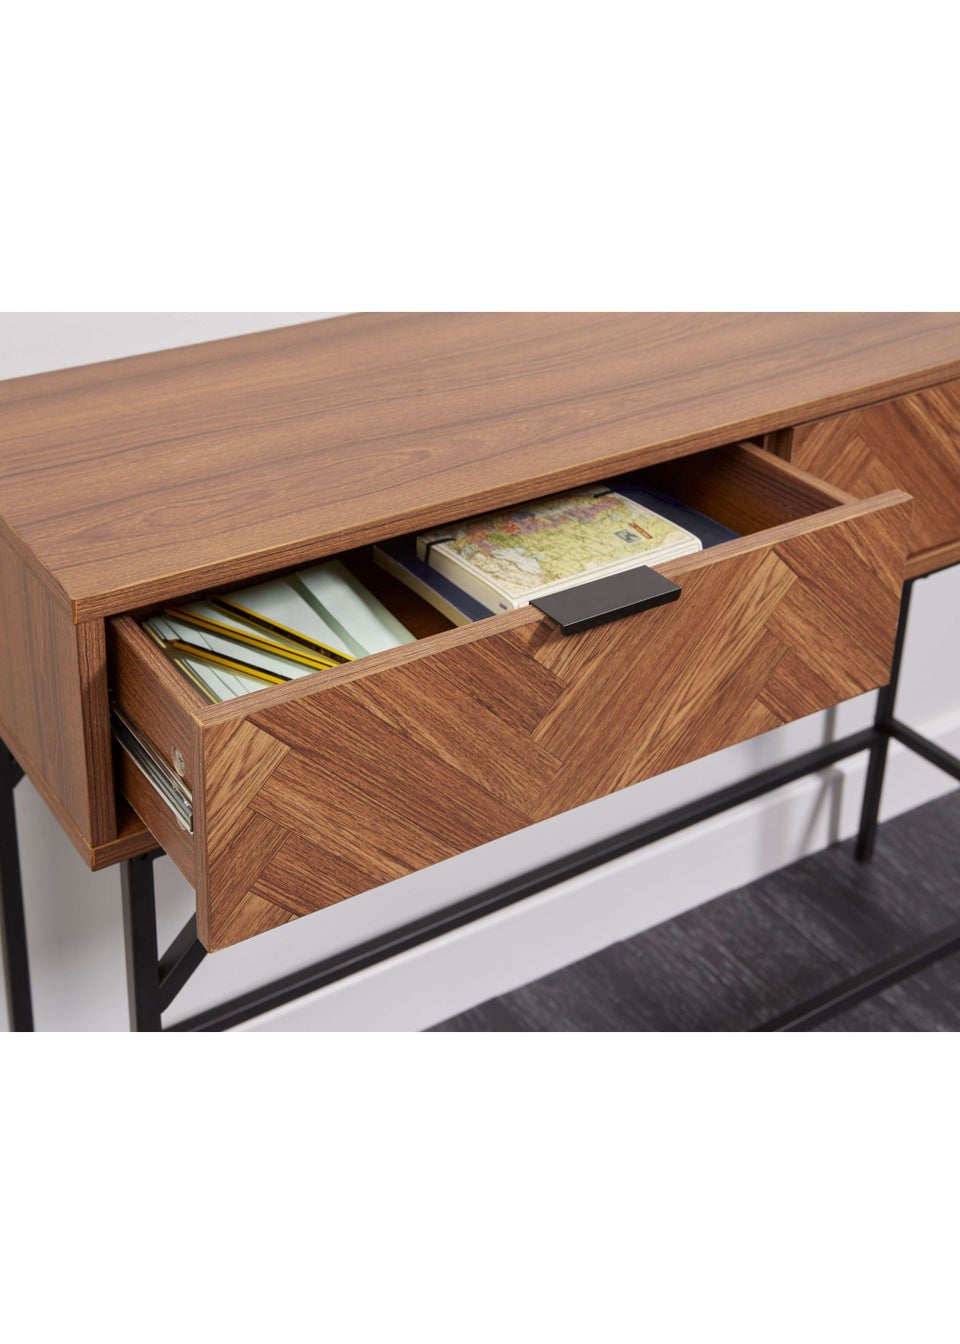 Lloyd Pascal Caprio 2 Drawer Console Table with Metal Legs (75cm x 100cm x 30cm)